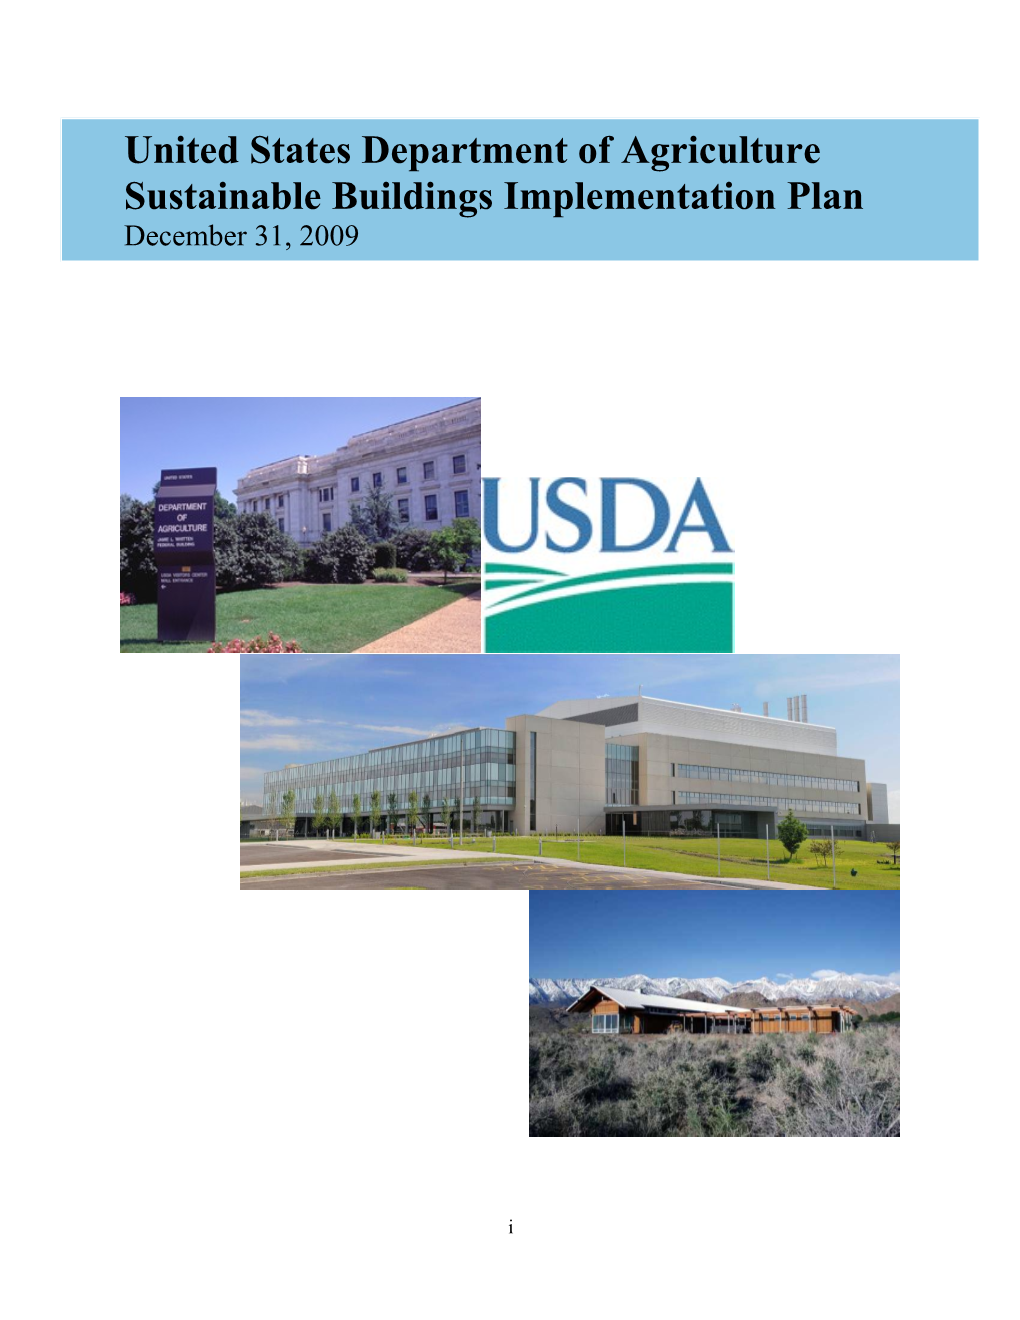 United States Department of Agriculture Sustainable Buildings Implementation Plan